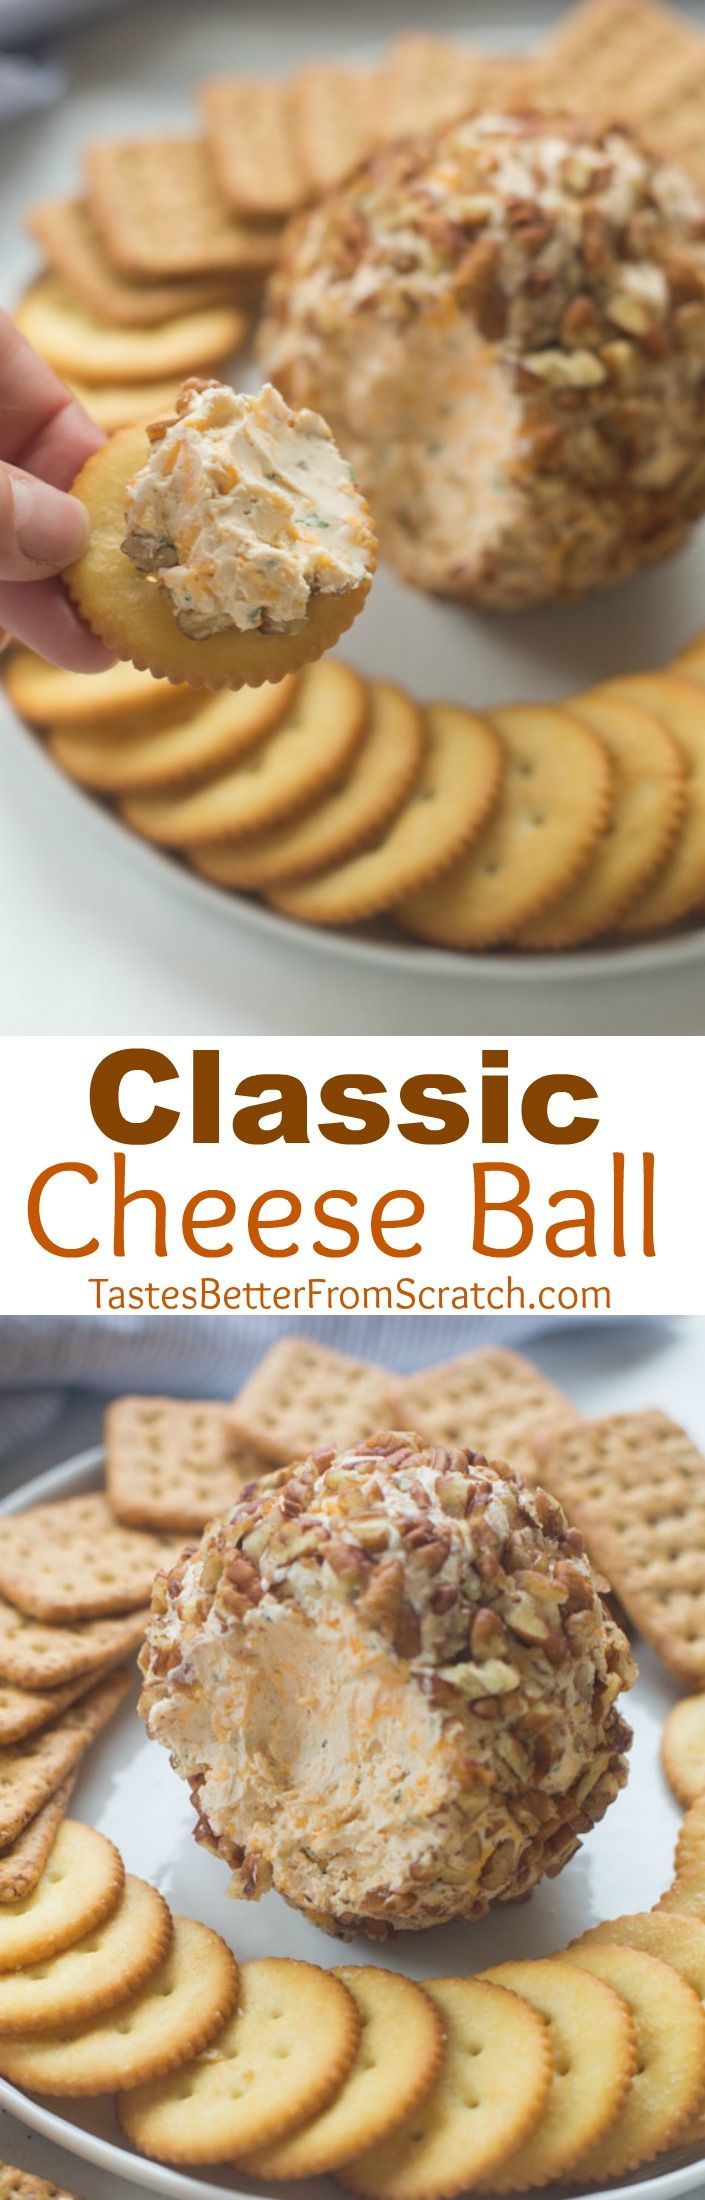 We LOVE this Classic Cheese Ball recipe made with real cheddar cheese, cream chees